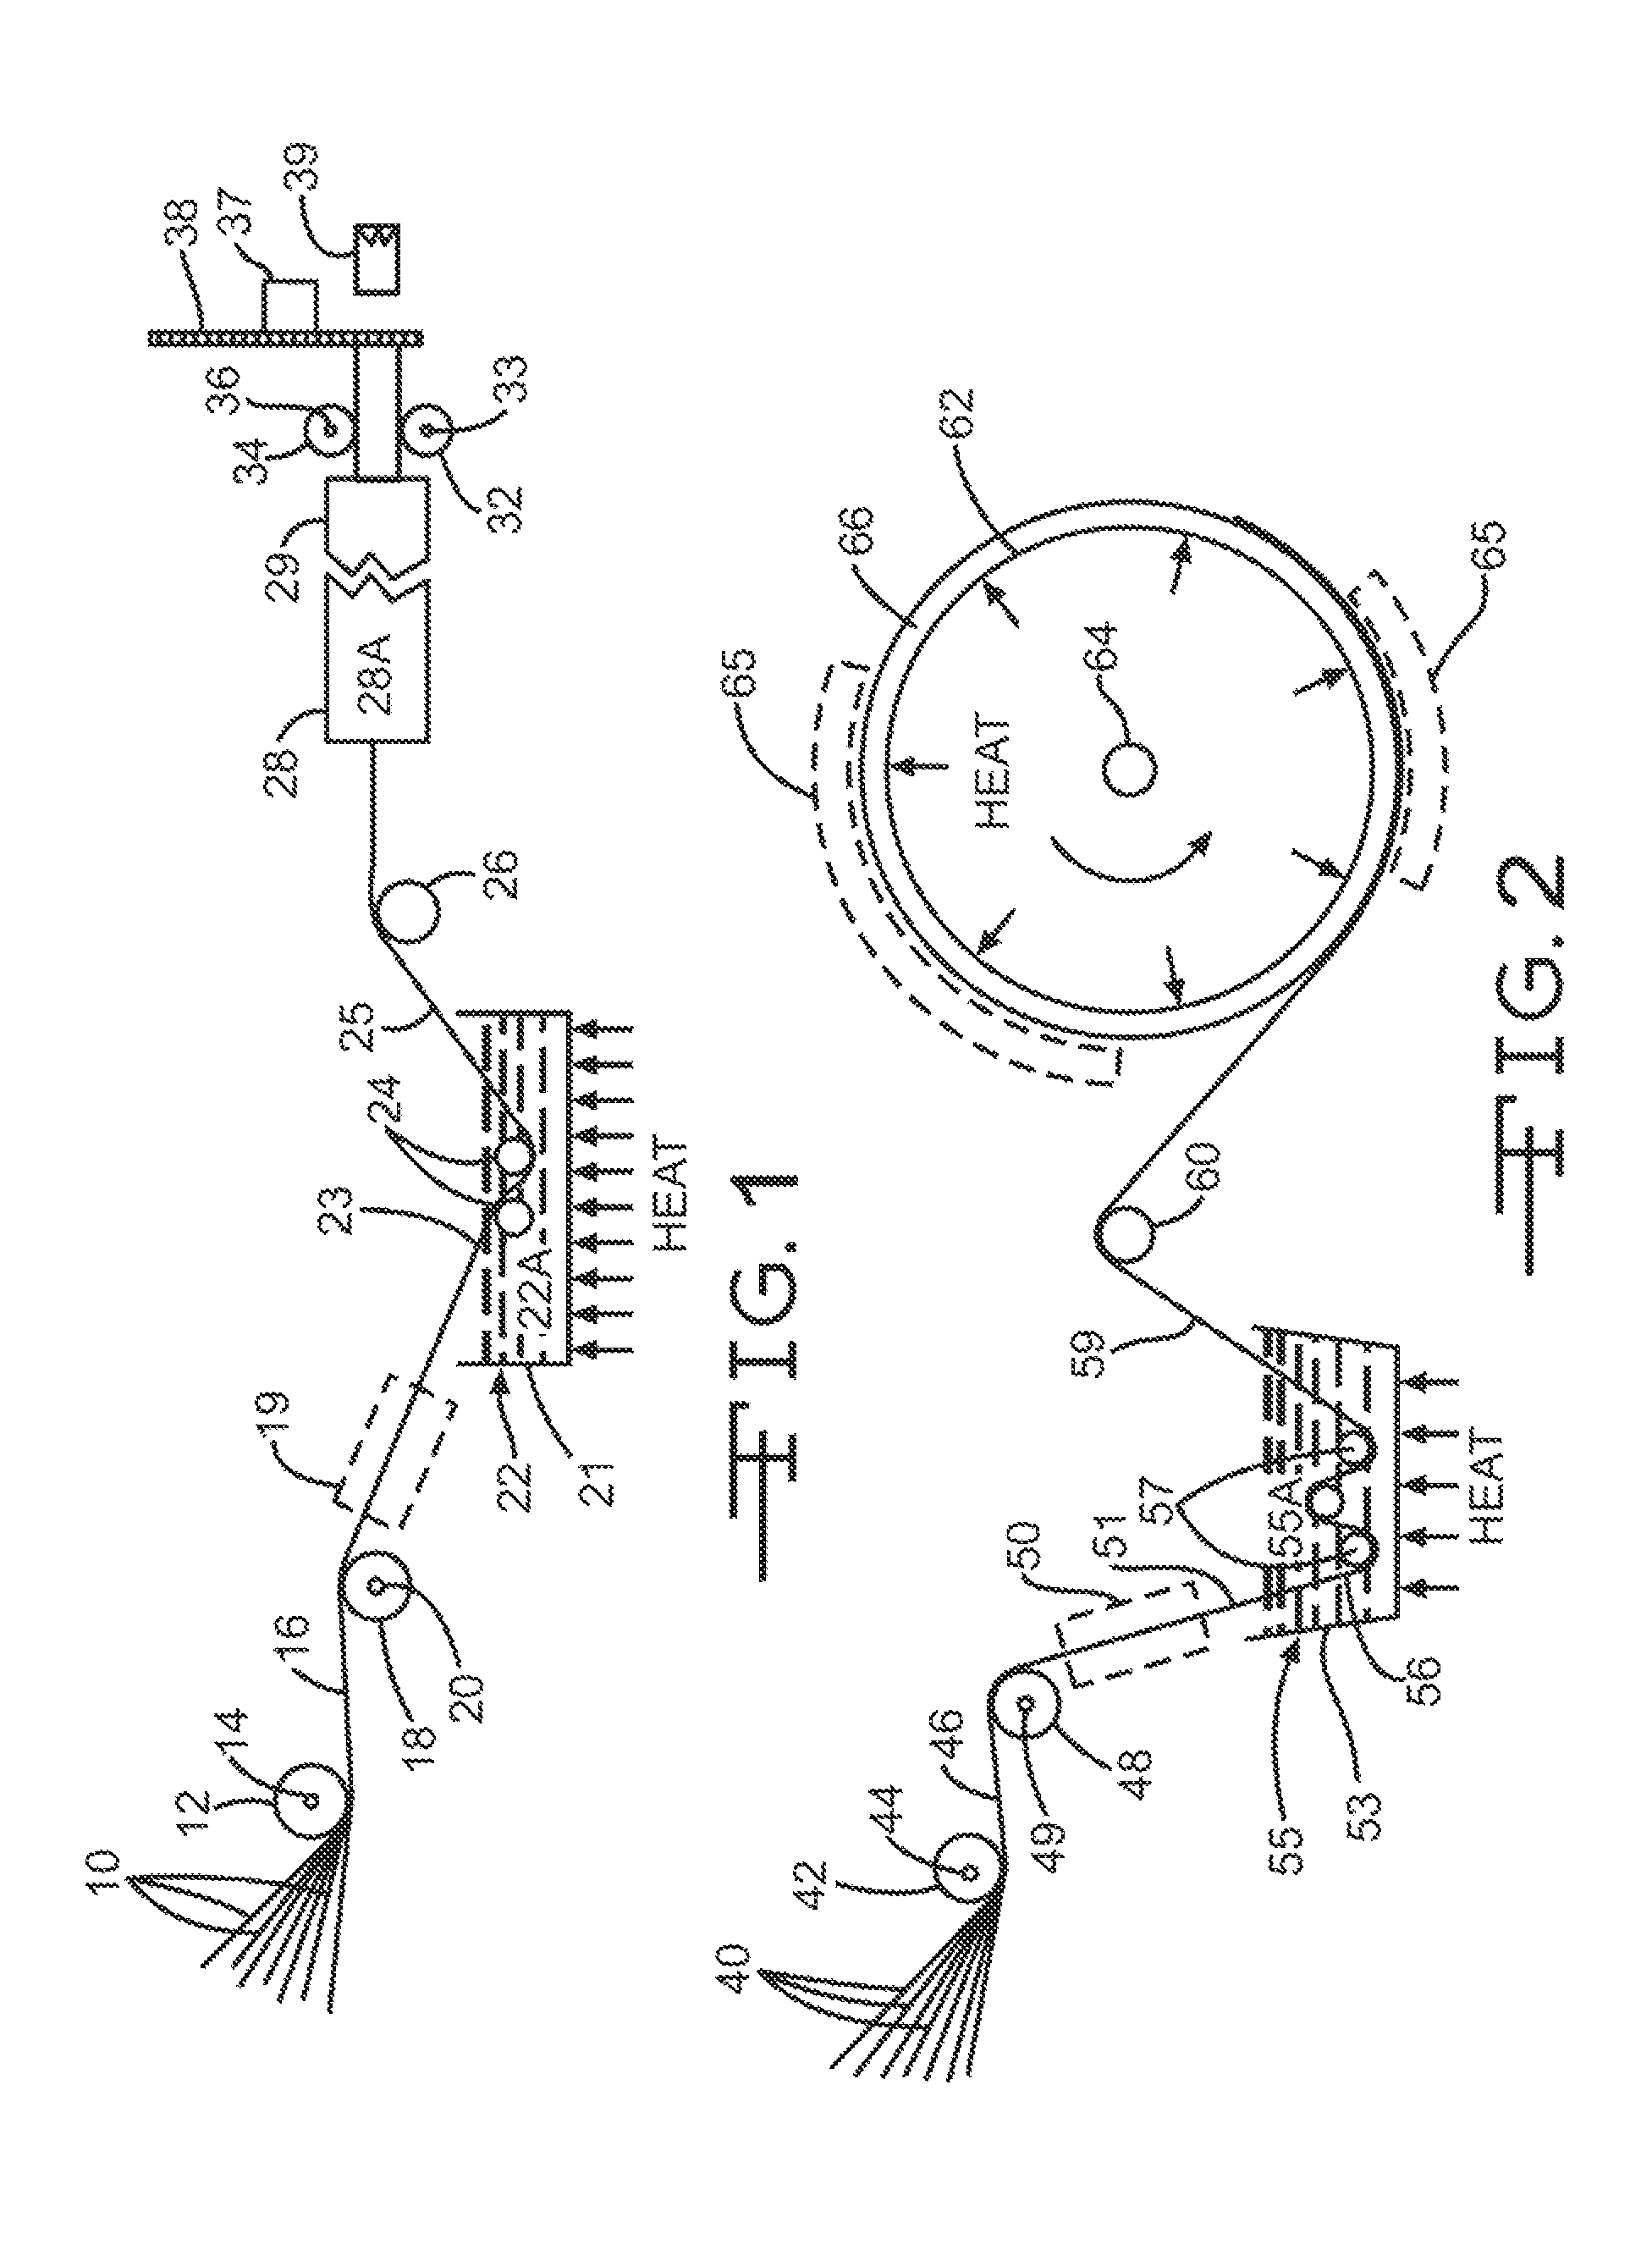 Methods for making reinforced thermoplastic composites using reactive fibers and/or reactive flakes